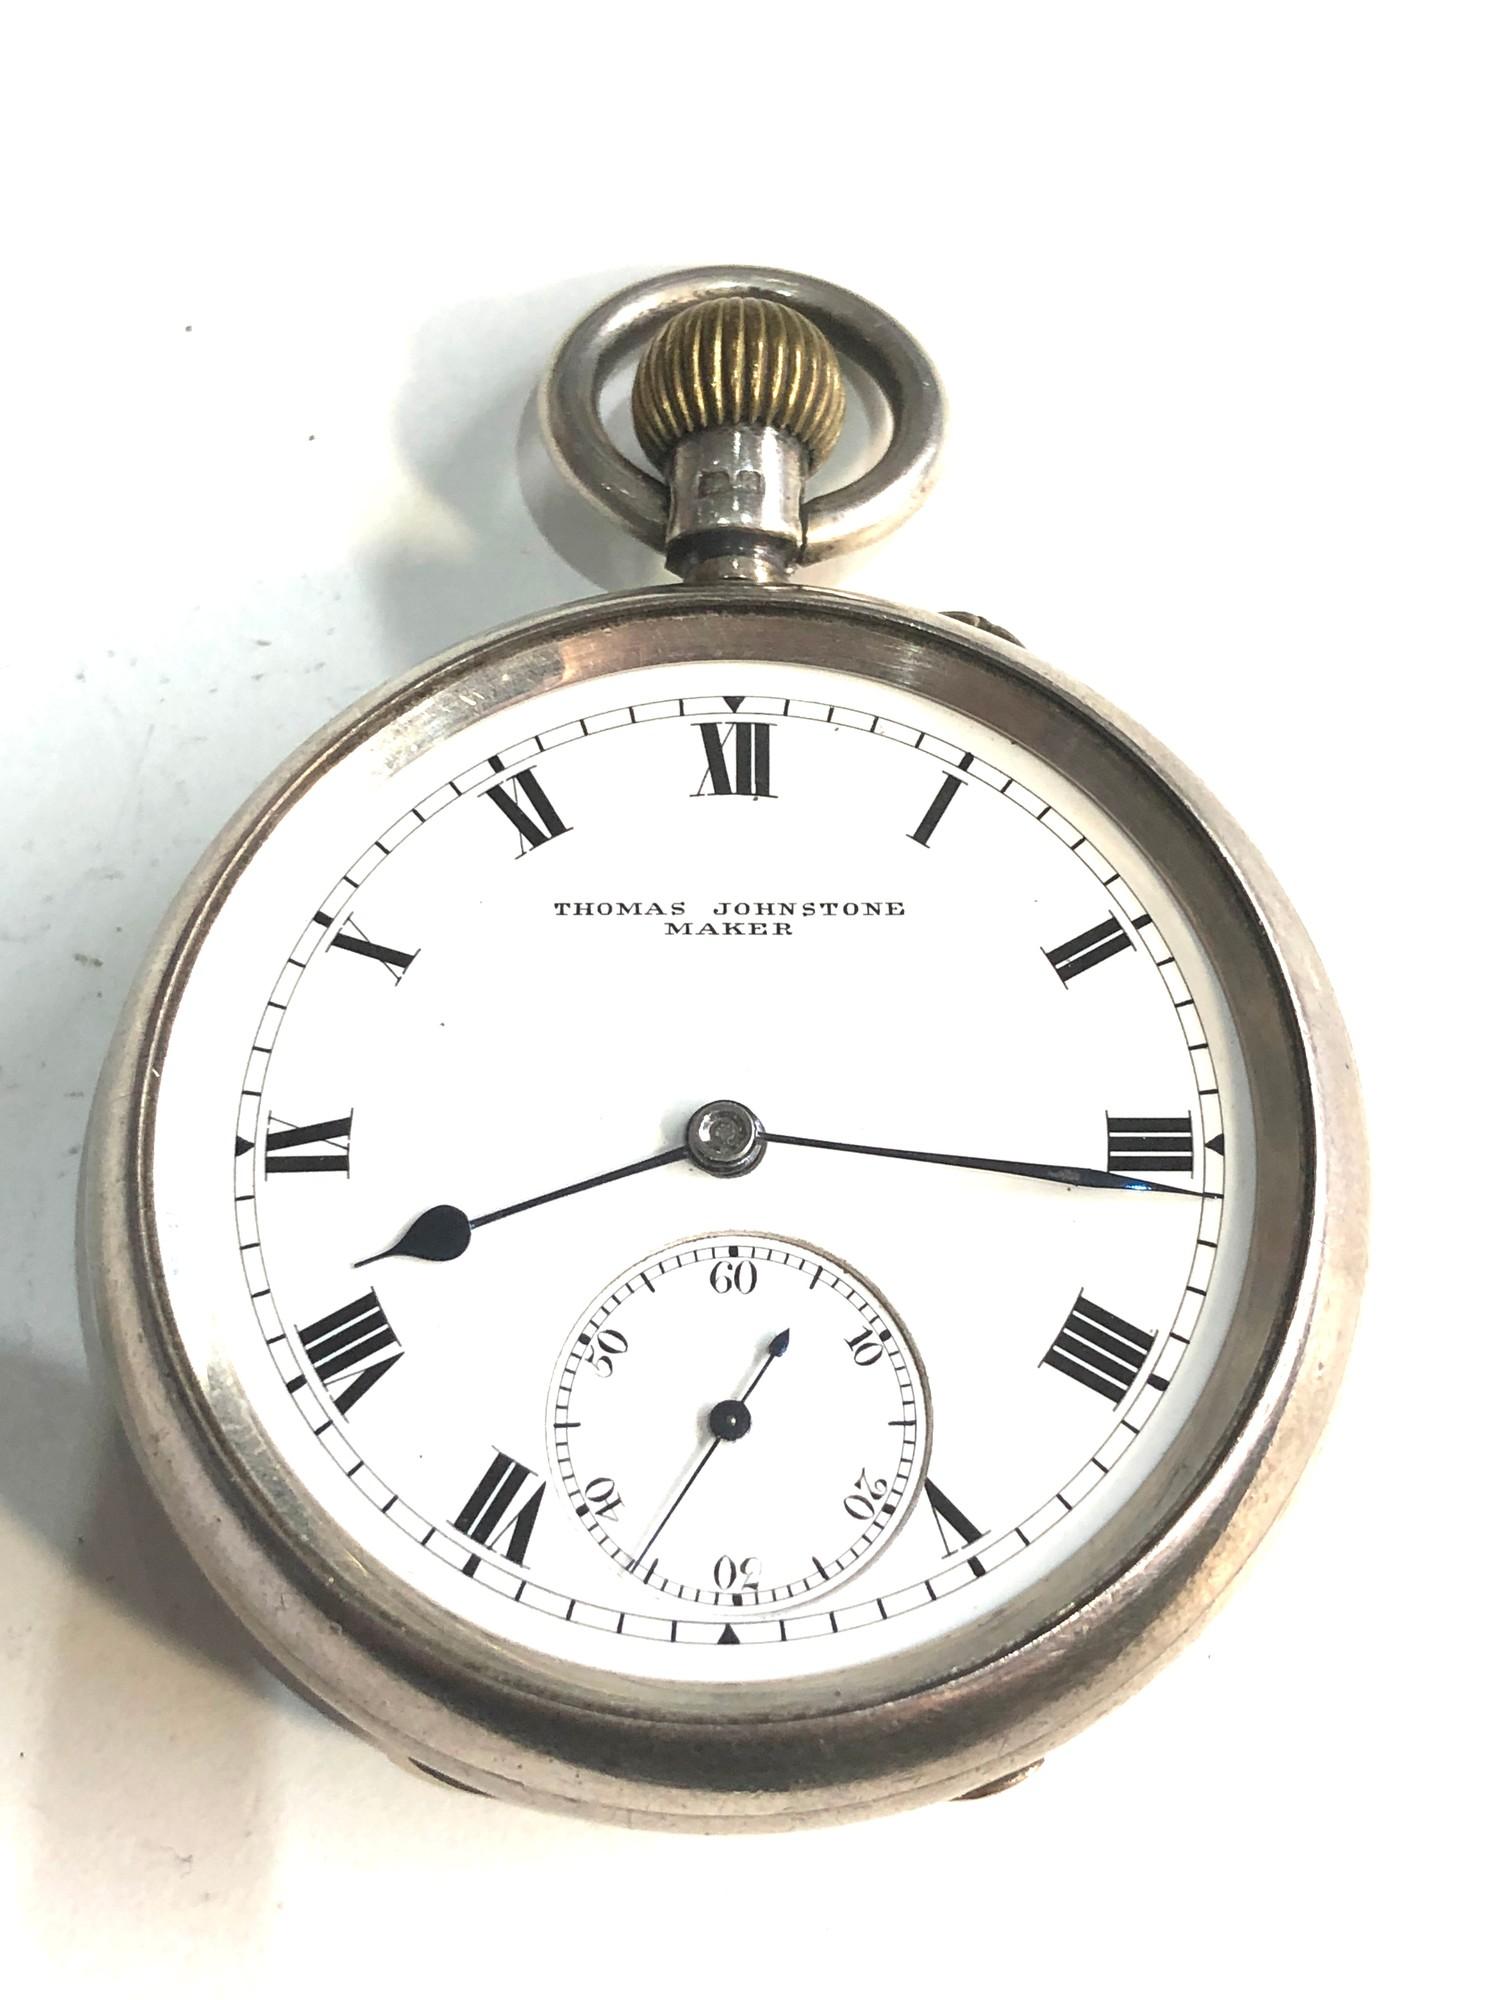 Antique silver open face pocket thomas johnstone glasgow the watch is ticking but no warranty